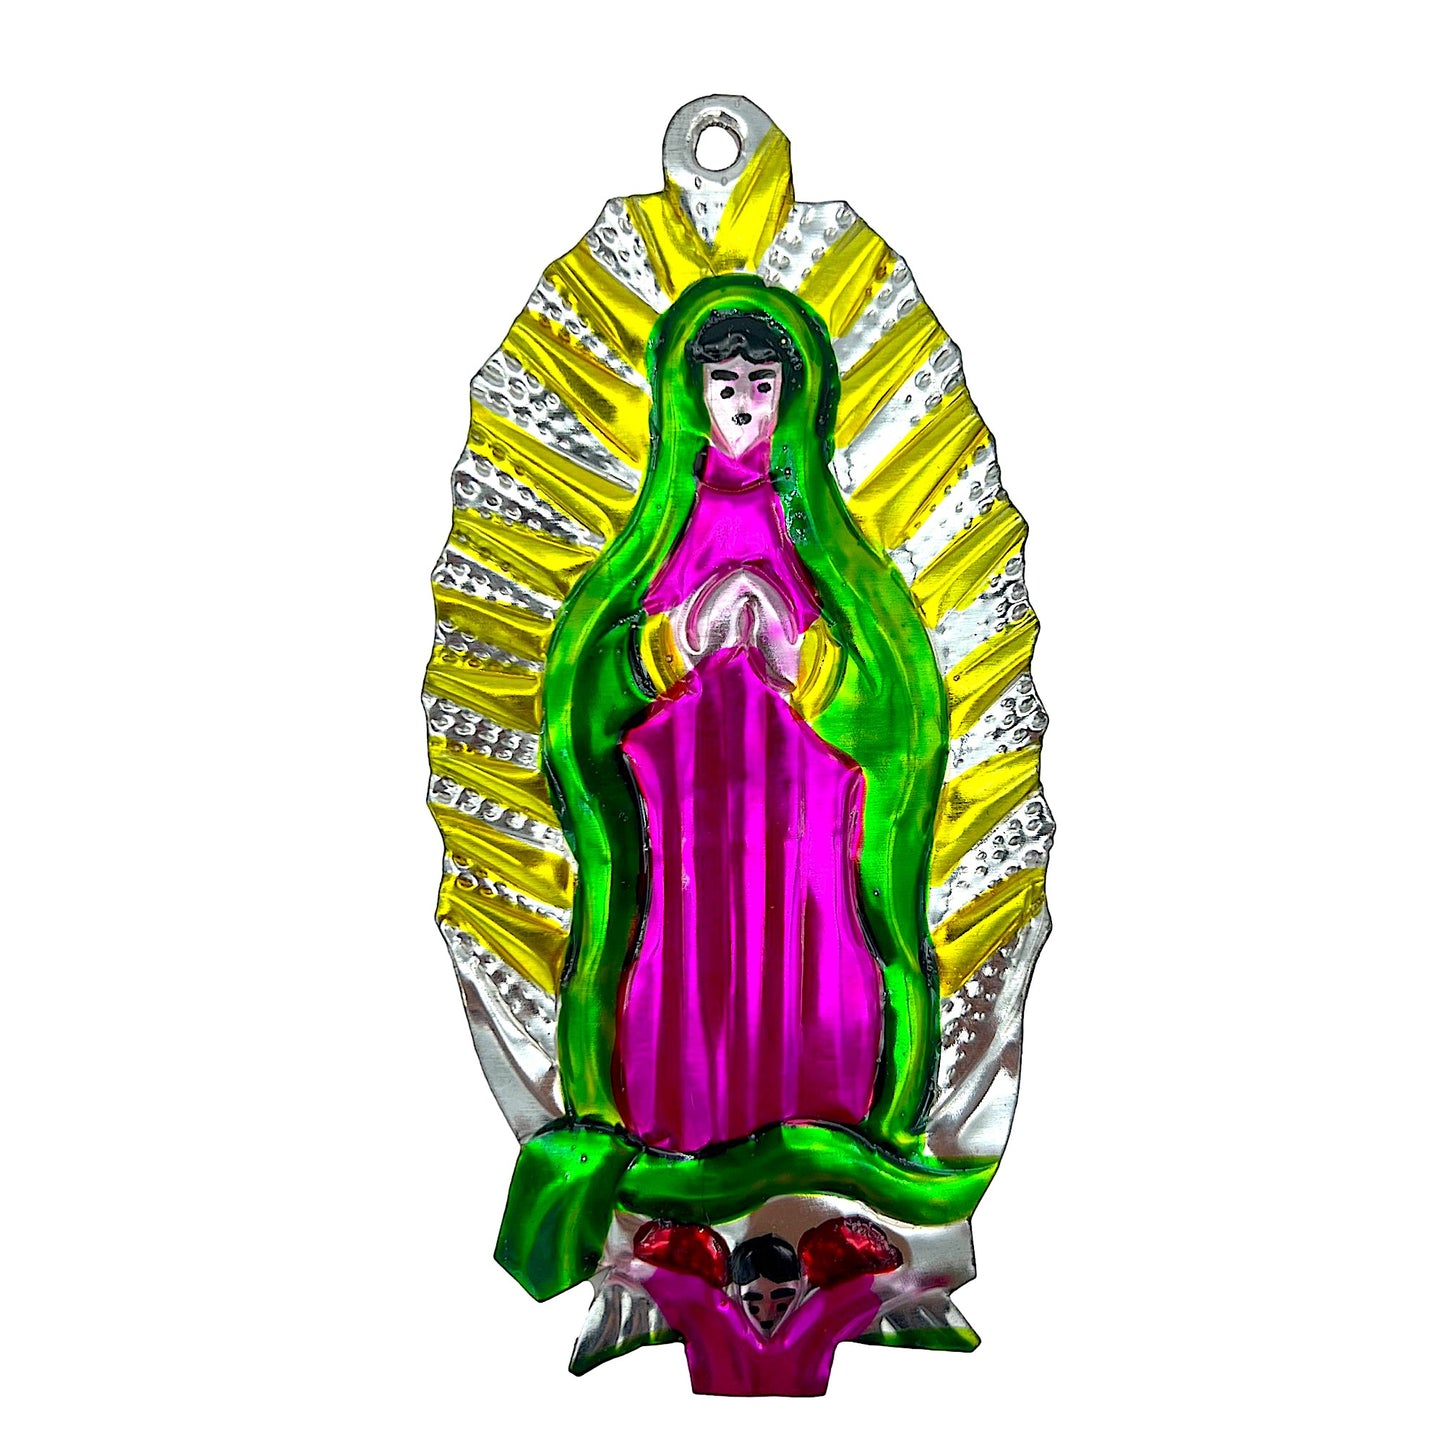 Our Lady of Guadalupe Mexican Milagro Art, a vibrant, handmade piece by skilled Mexican artisans.